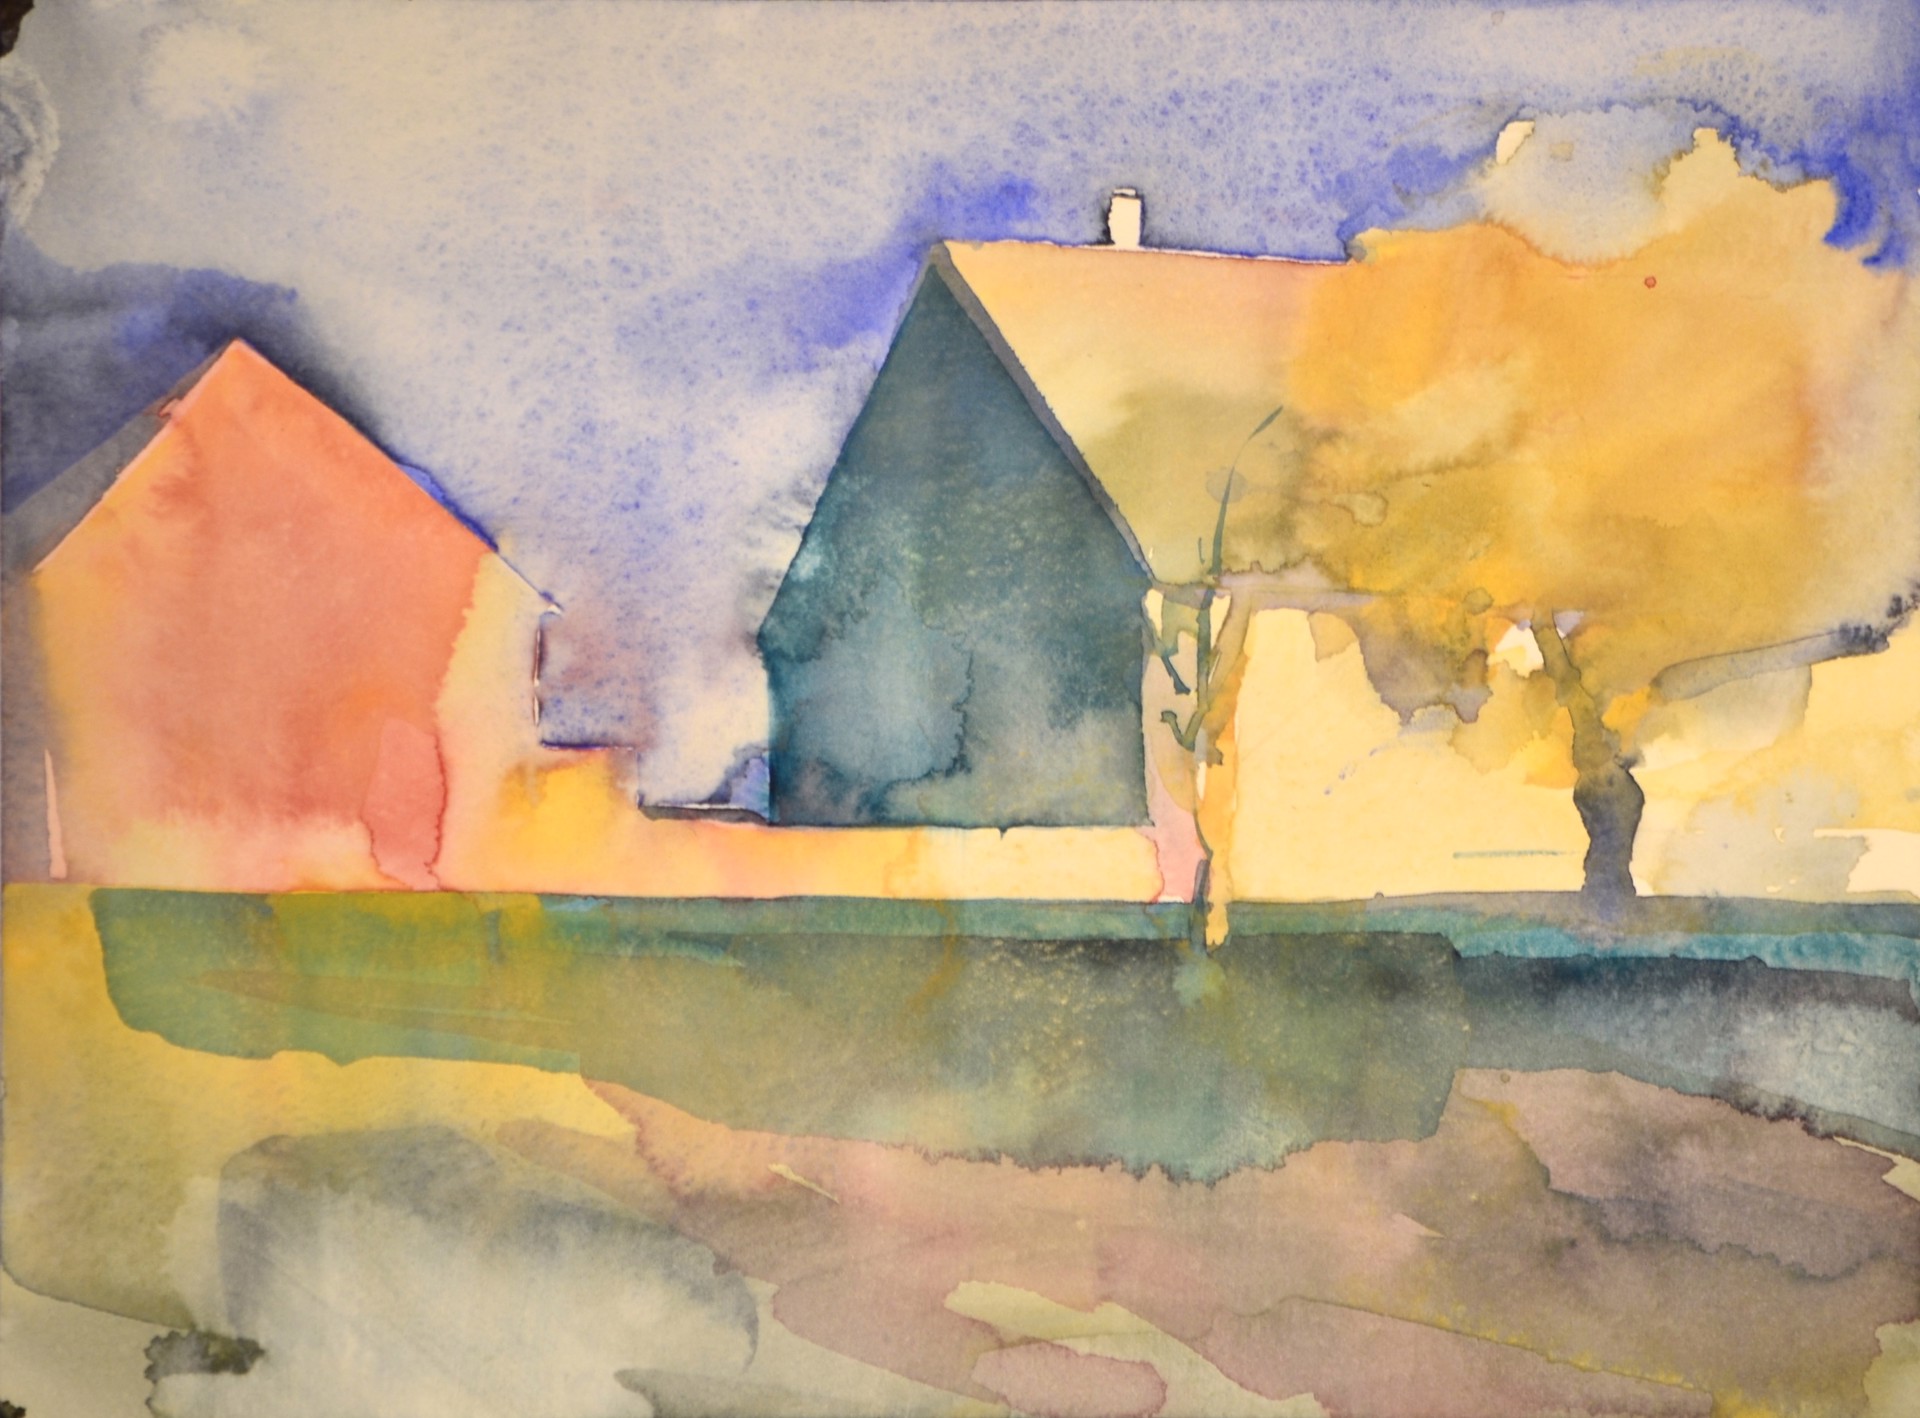 Pannonia Gable by Christopher St. Leger